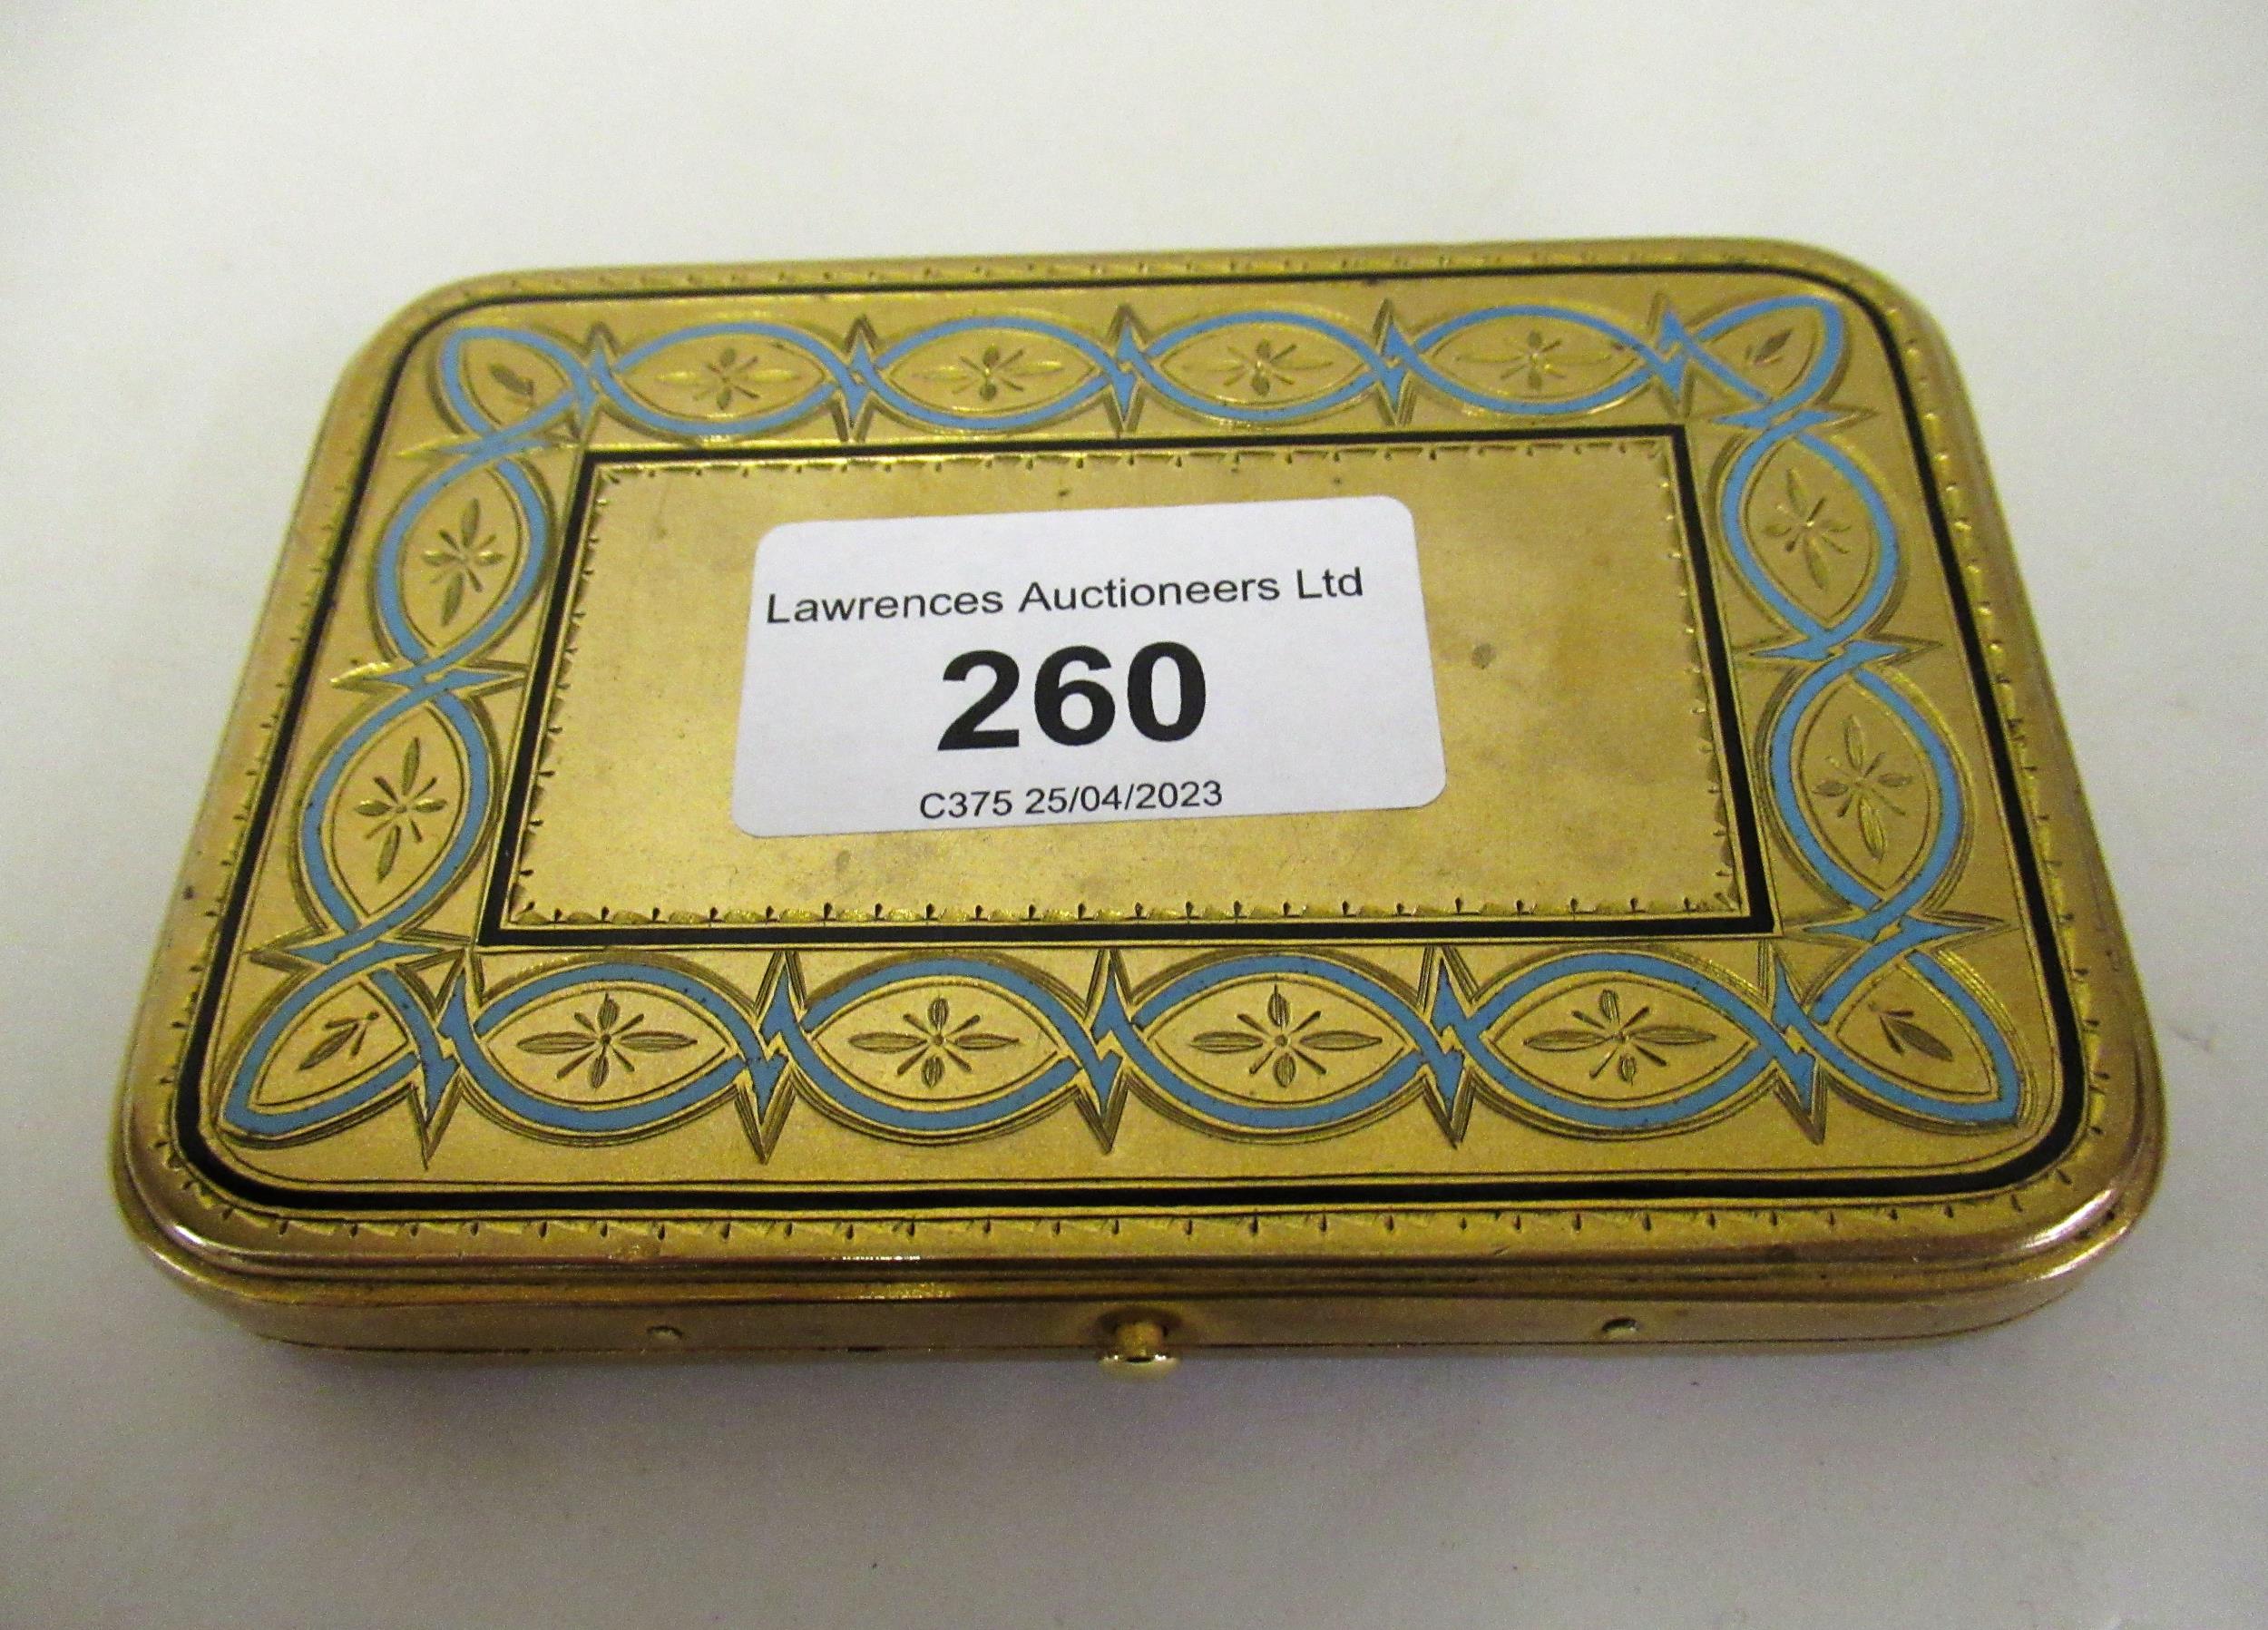 Late 19th / early 20th Century gilt brass blue and black enamel decorated calling card case with